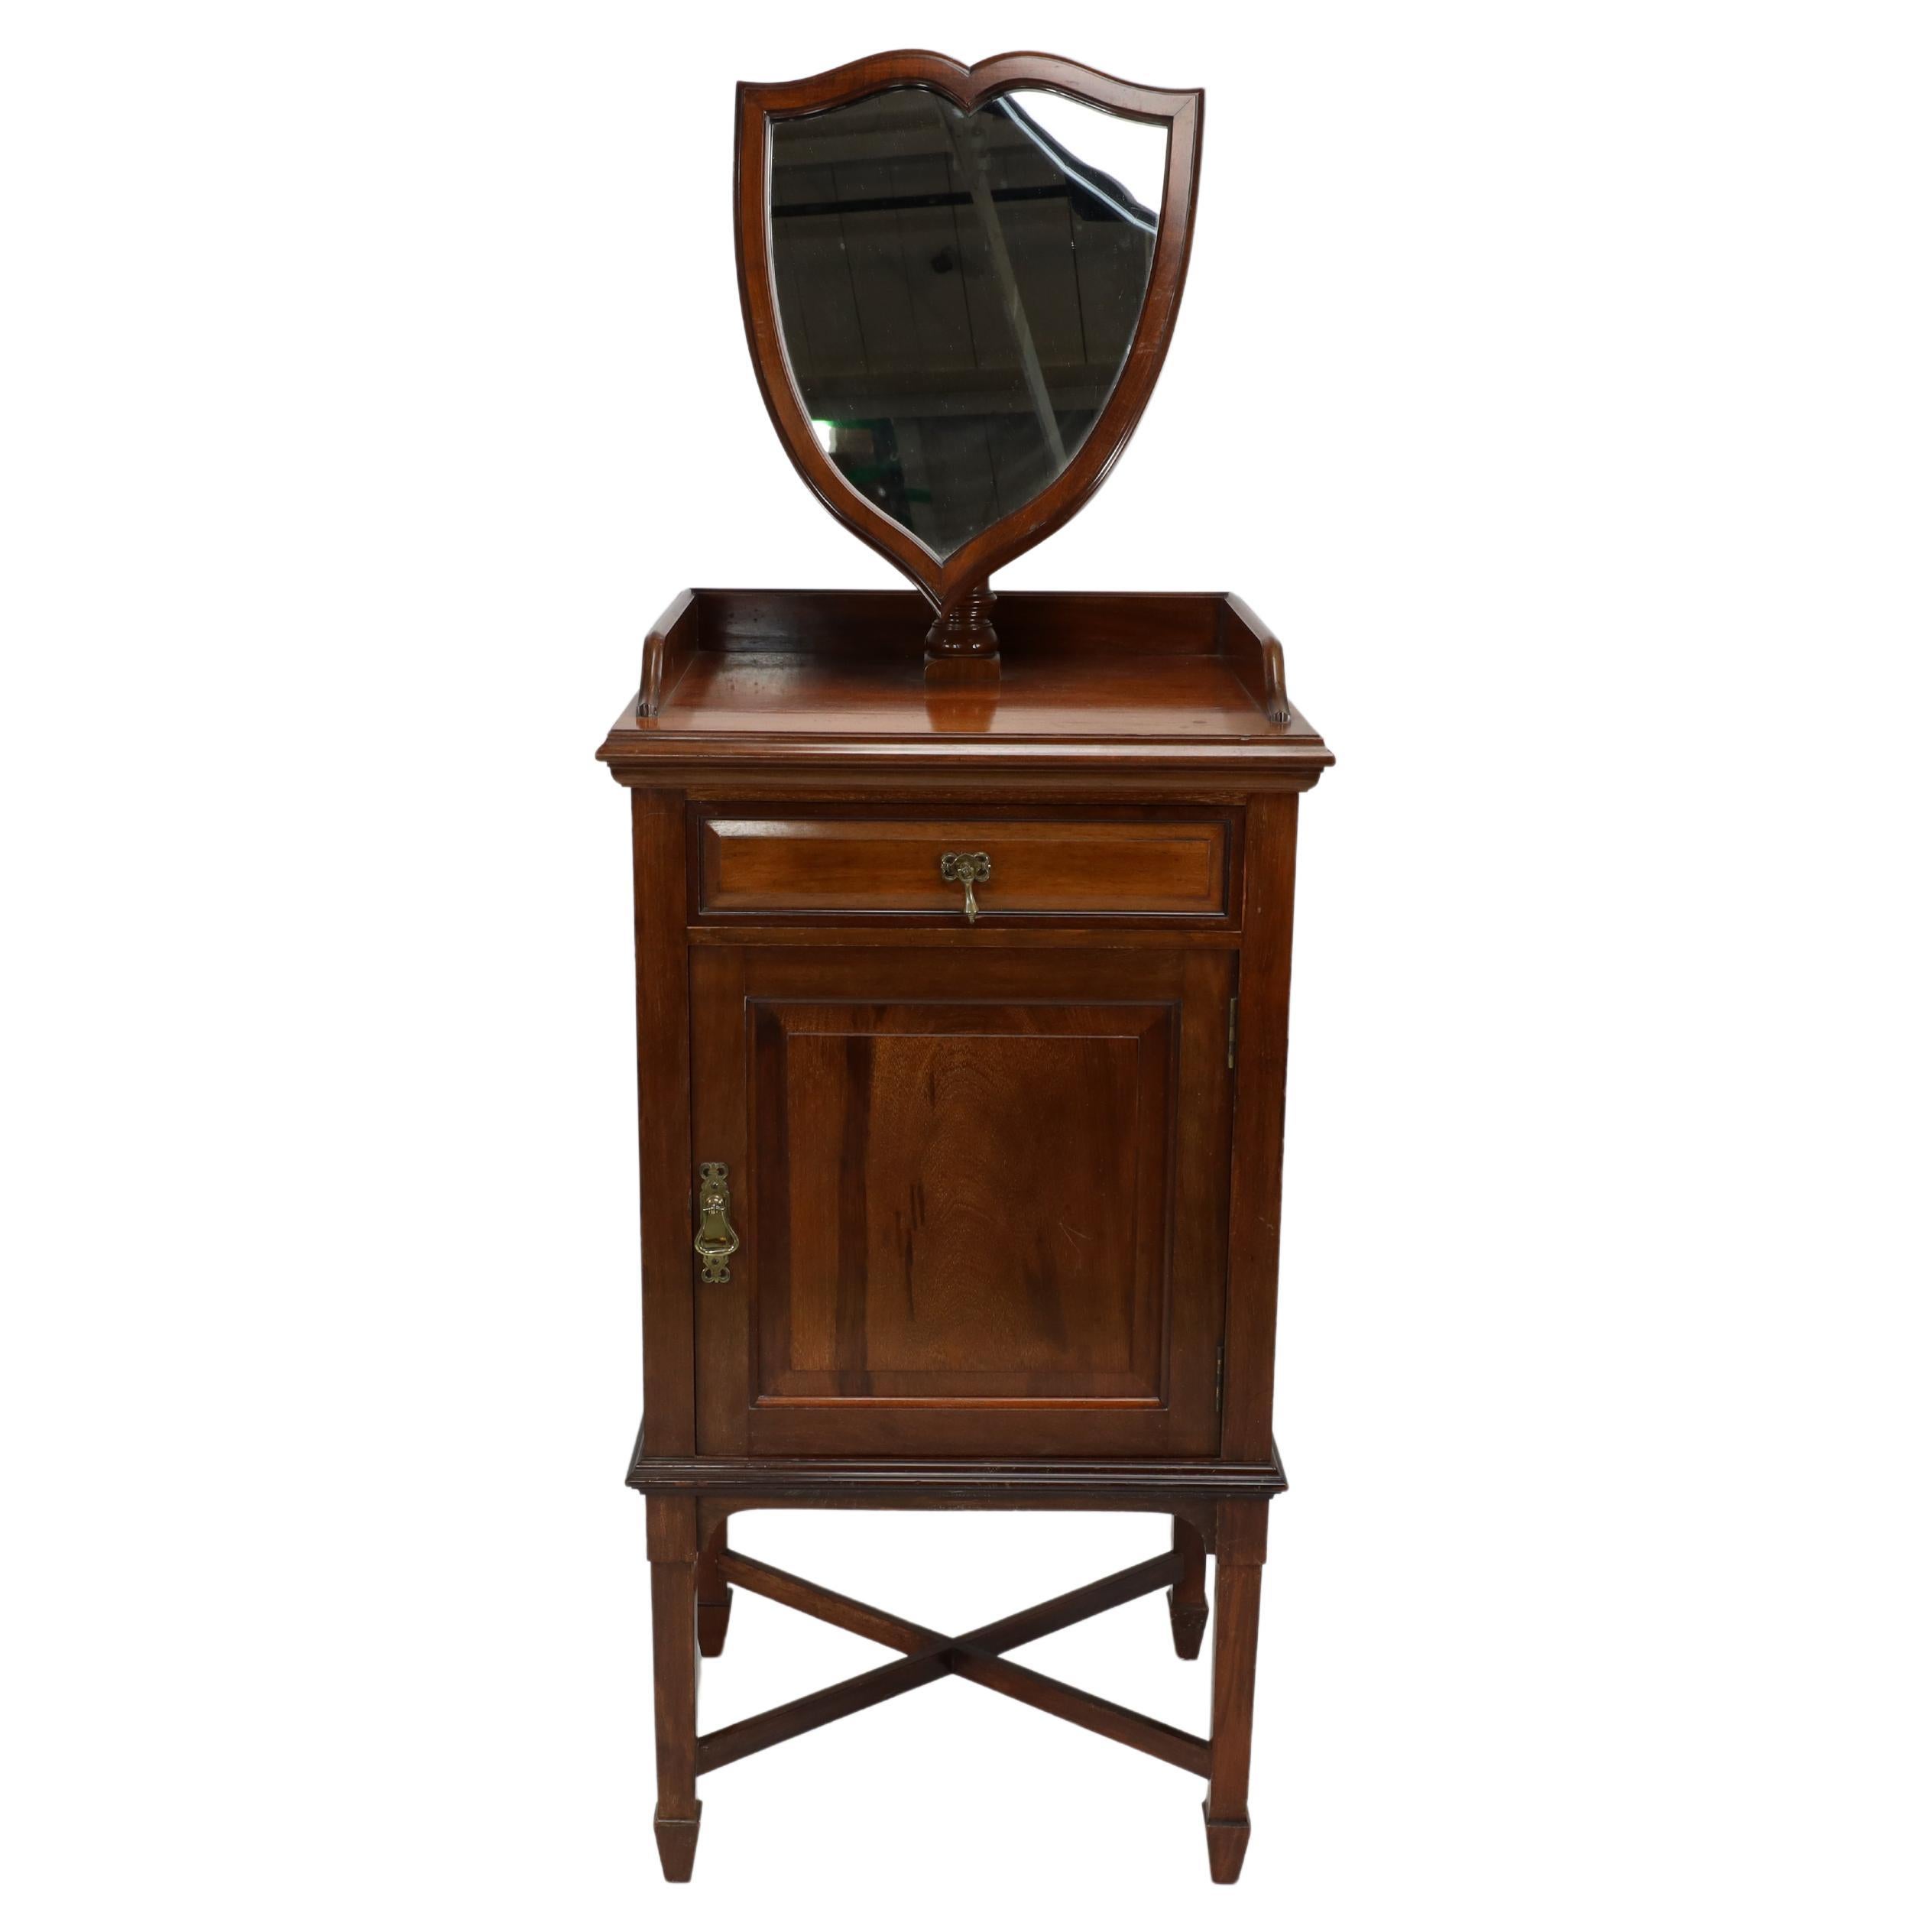 Morris and Co. A fine quality Arts & Crafts Walnut wash or shaving stand, with adjustable extending shield shaped mirror, upper drawer and cupboard lined with Sienna marble the square tapering legs with arrow head feet united by a cross stretcher.